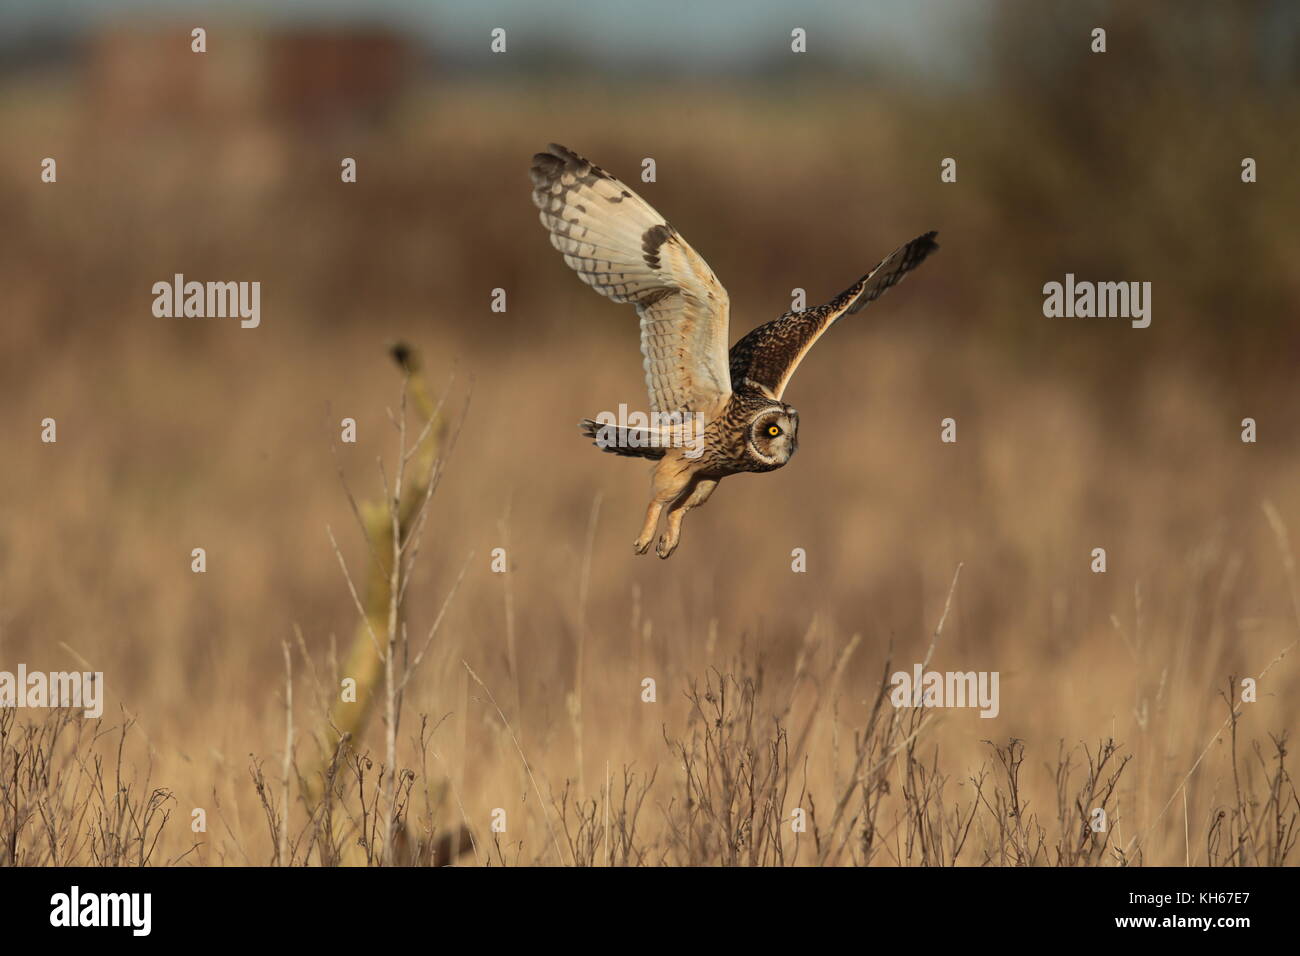 Hunting Short-eared Owl, three linked images of an Owl flying over a mossland meadow Stock Photo